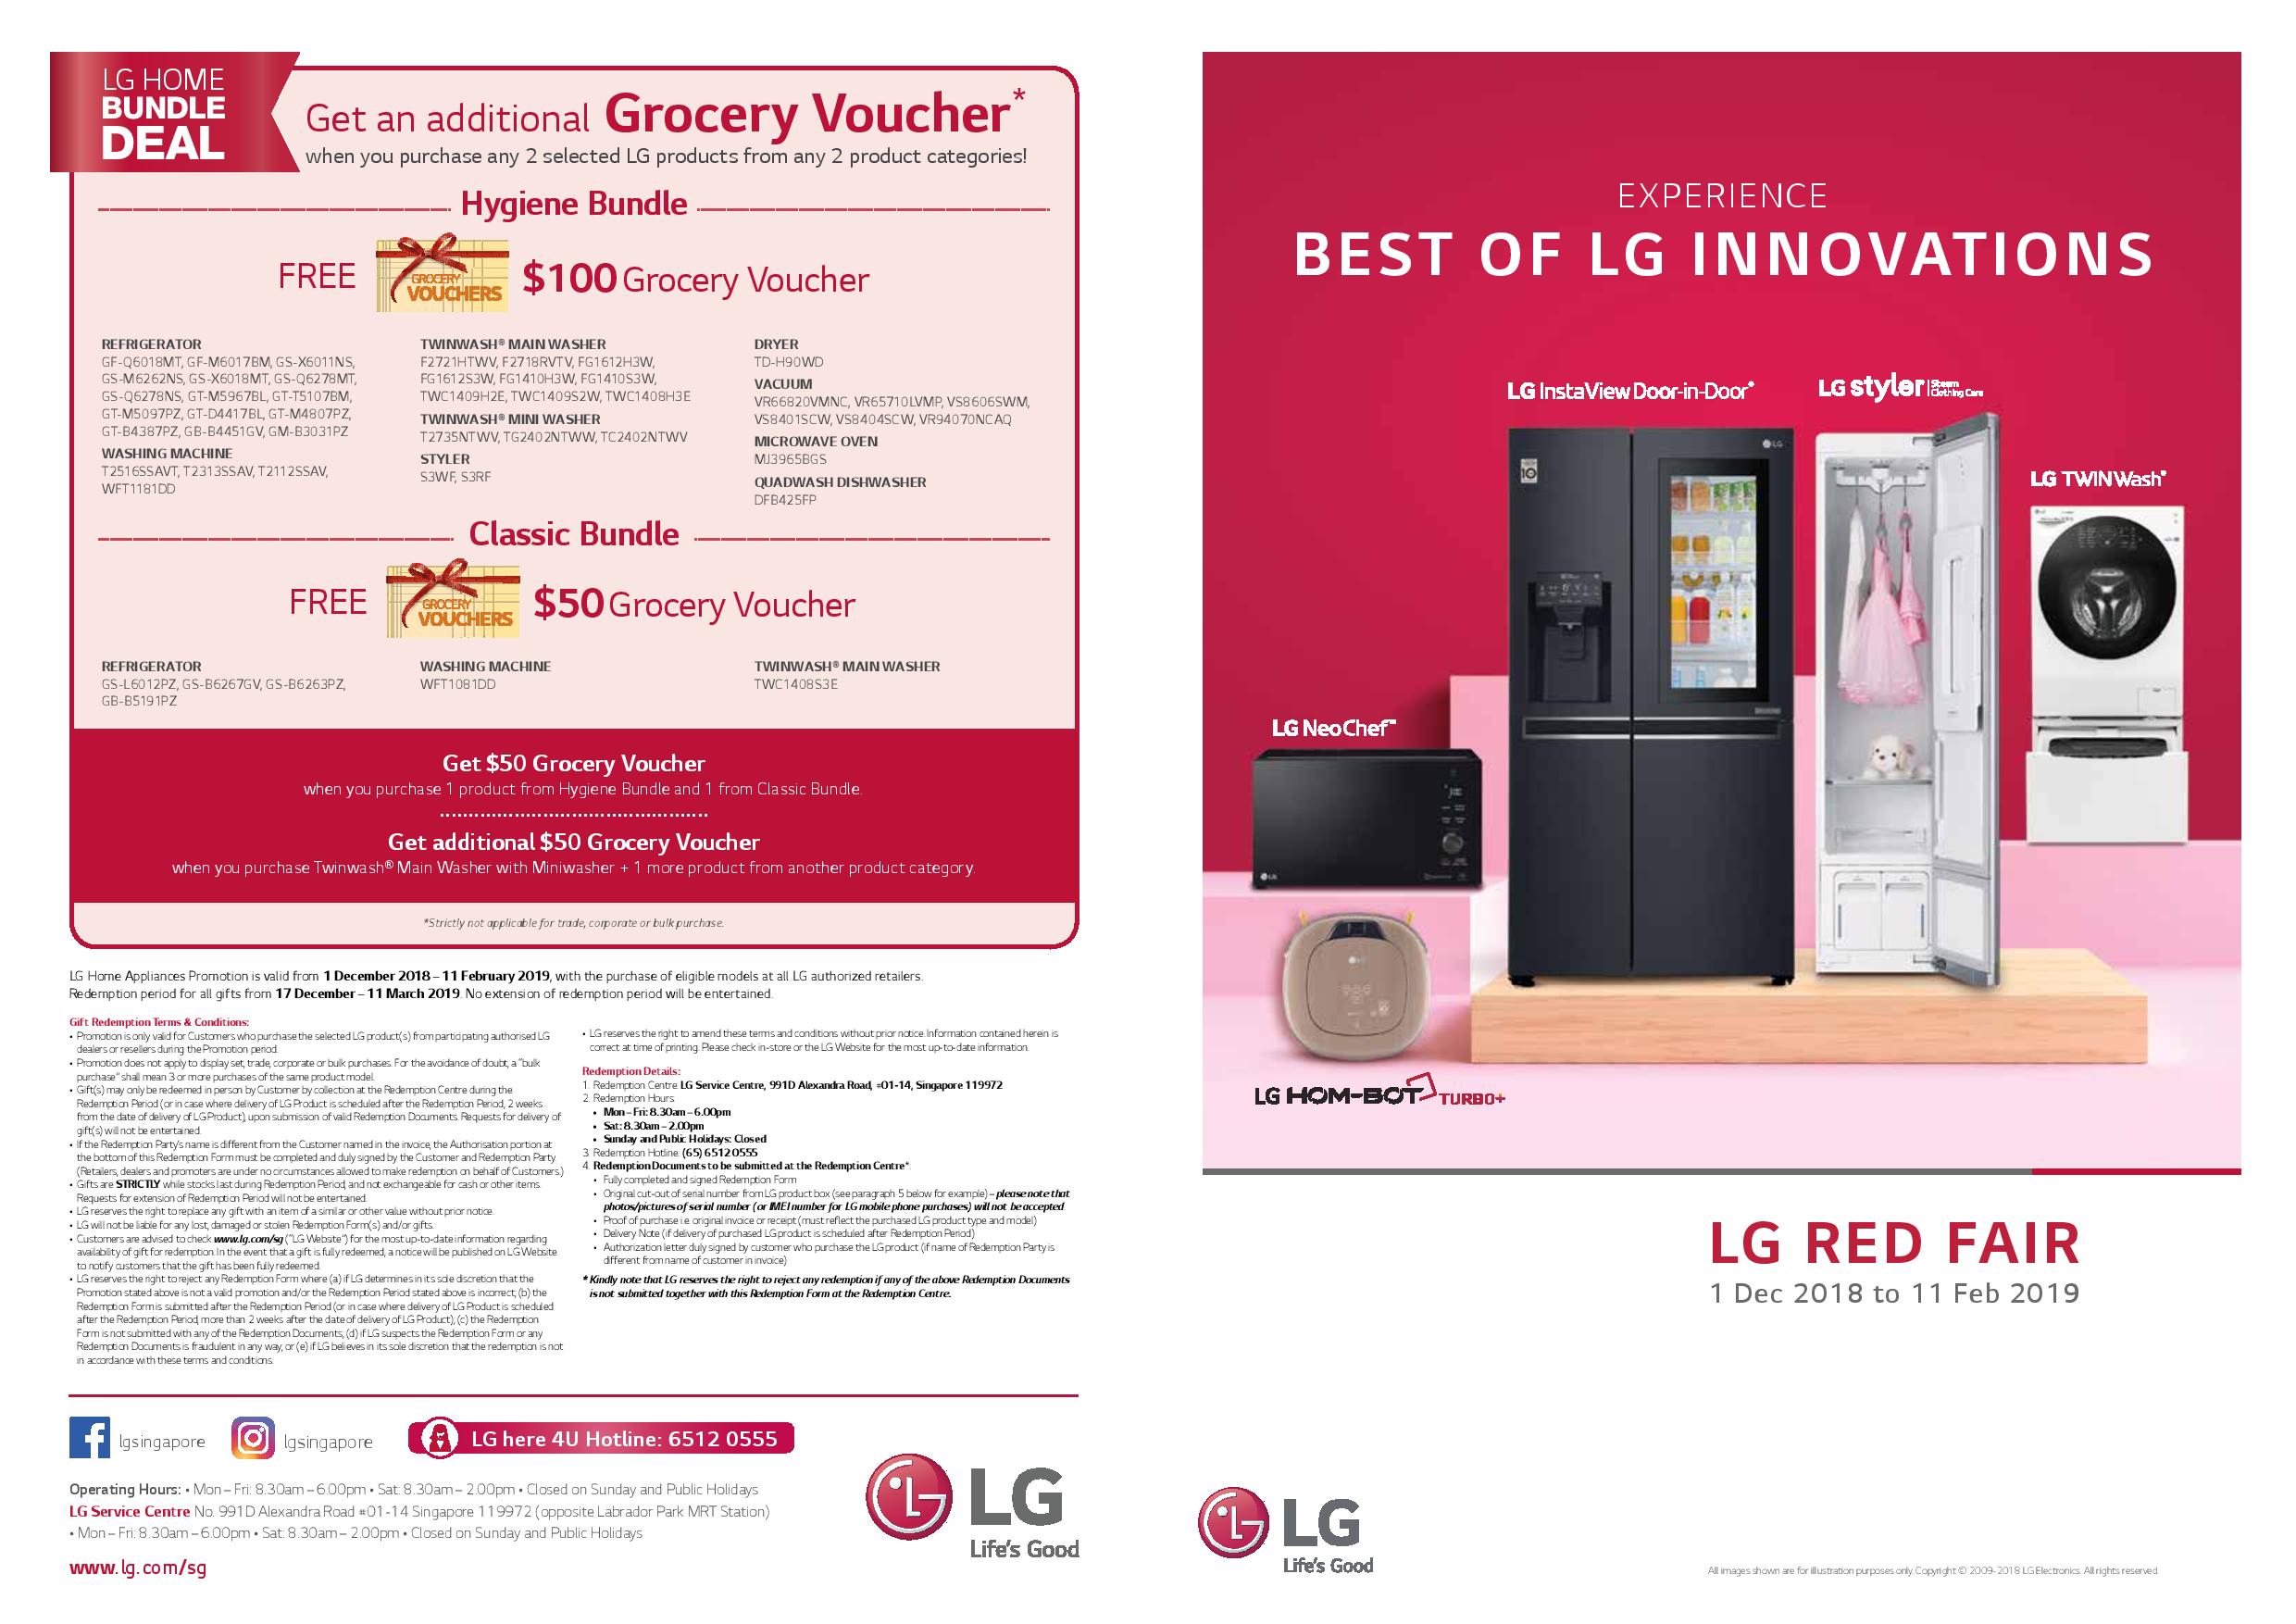 LG Red Fair to Celebrate CNY 2019 !